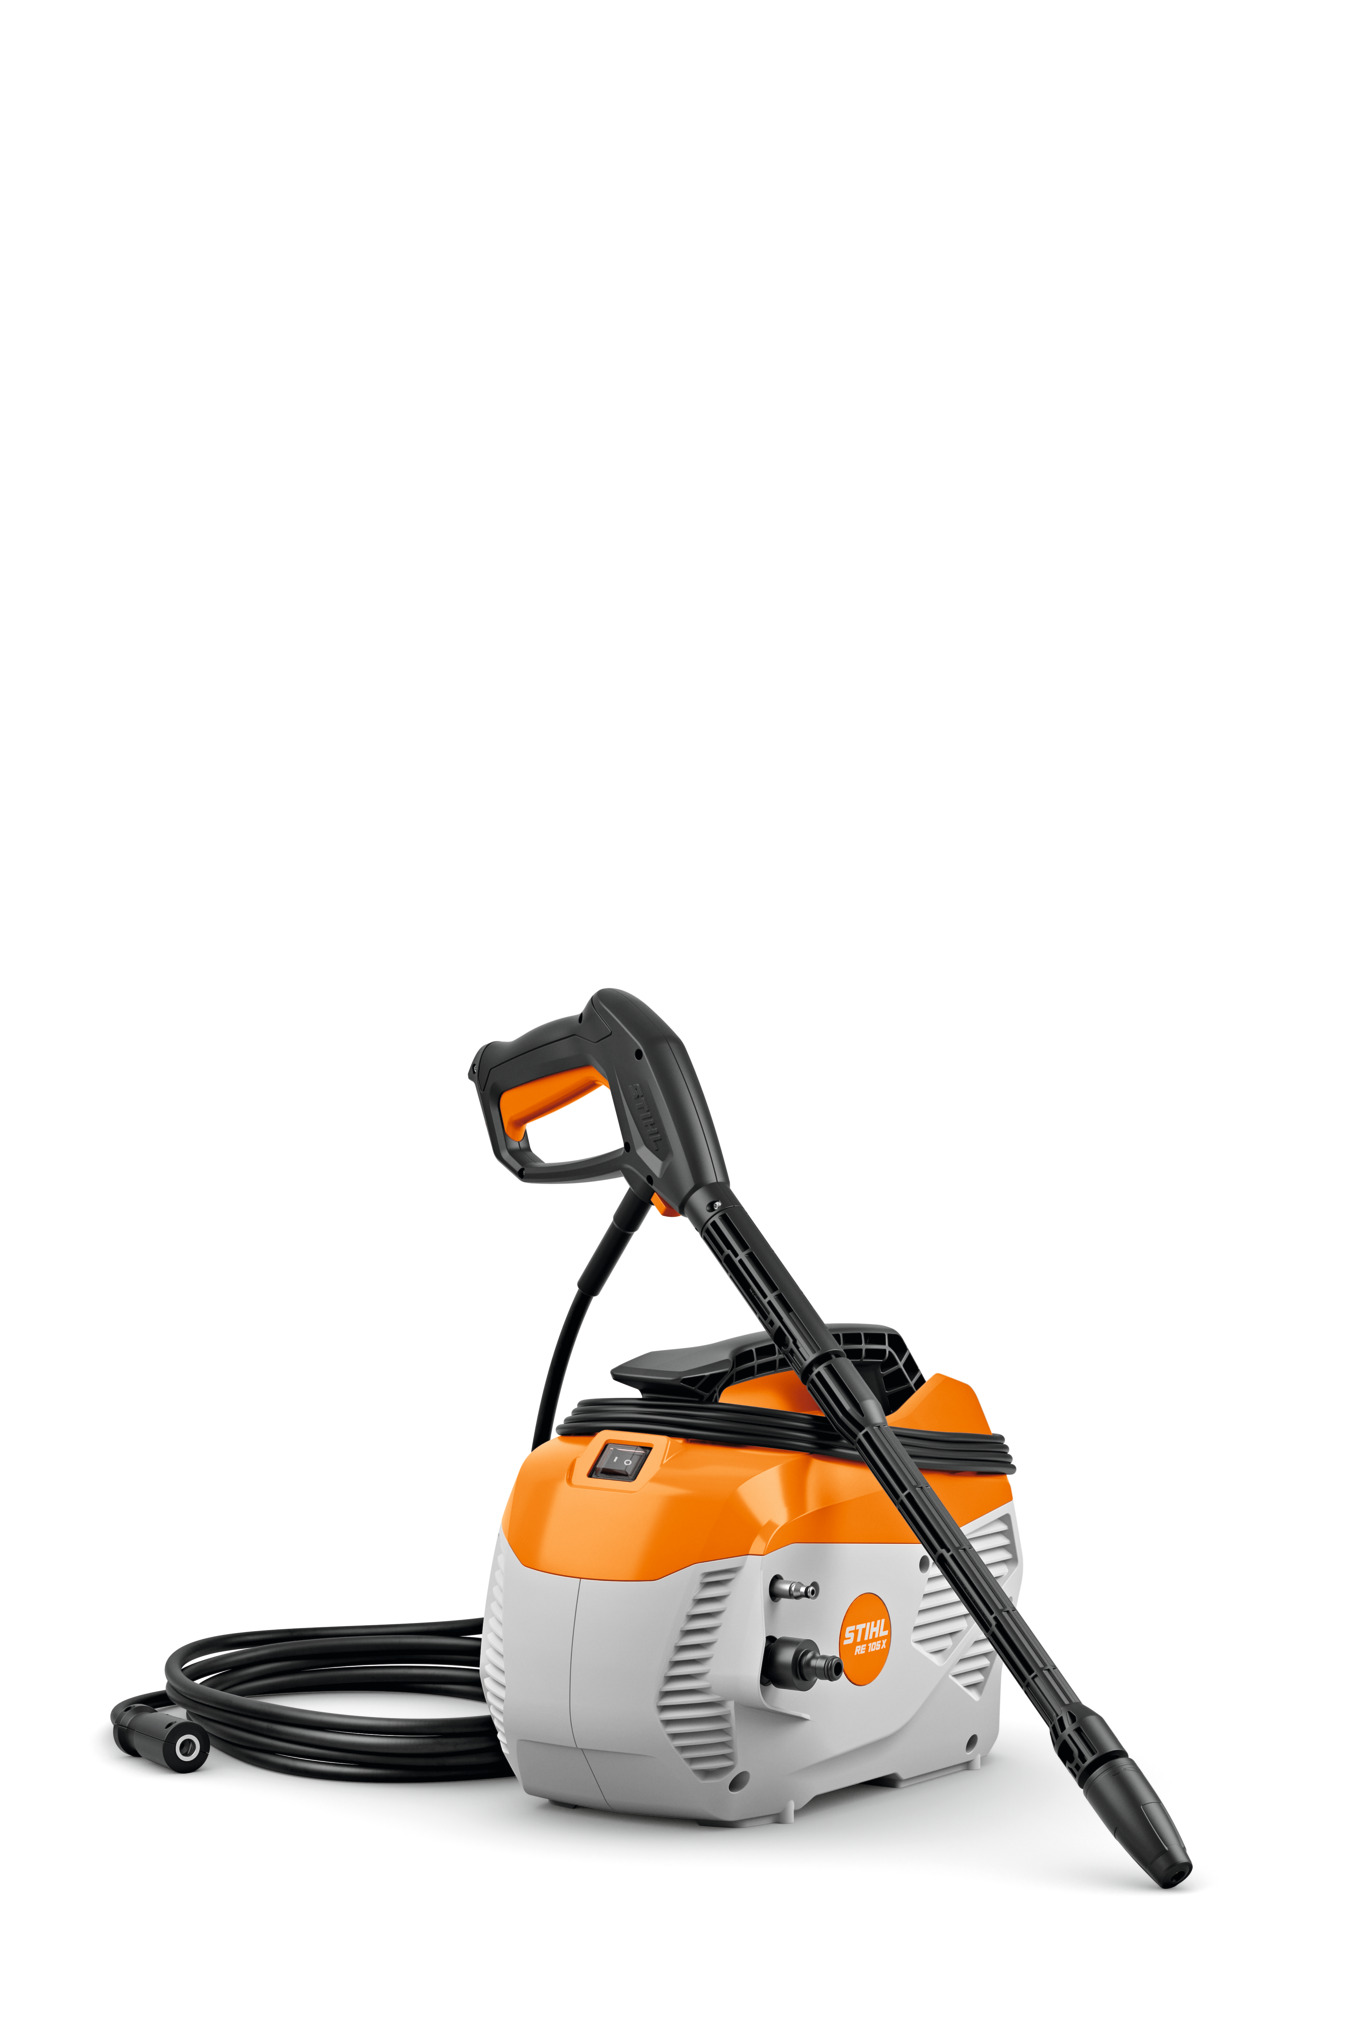 RE 105X Electric Pressure Washer